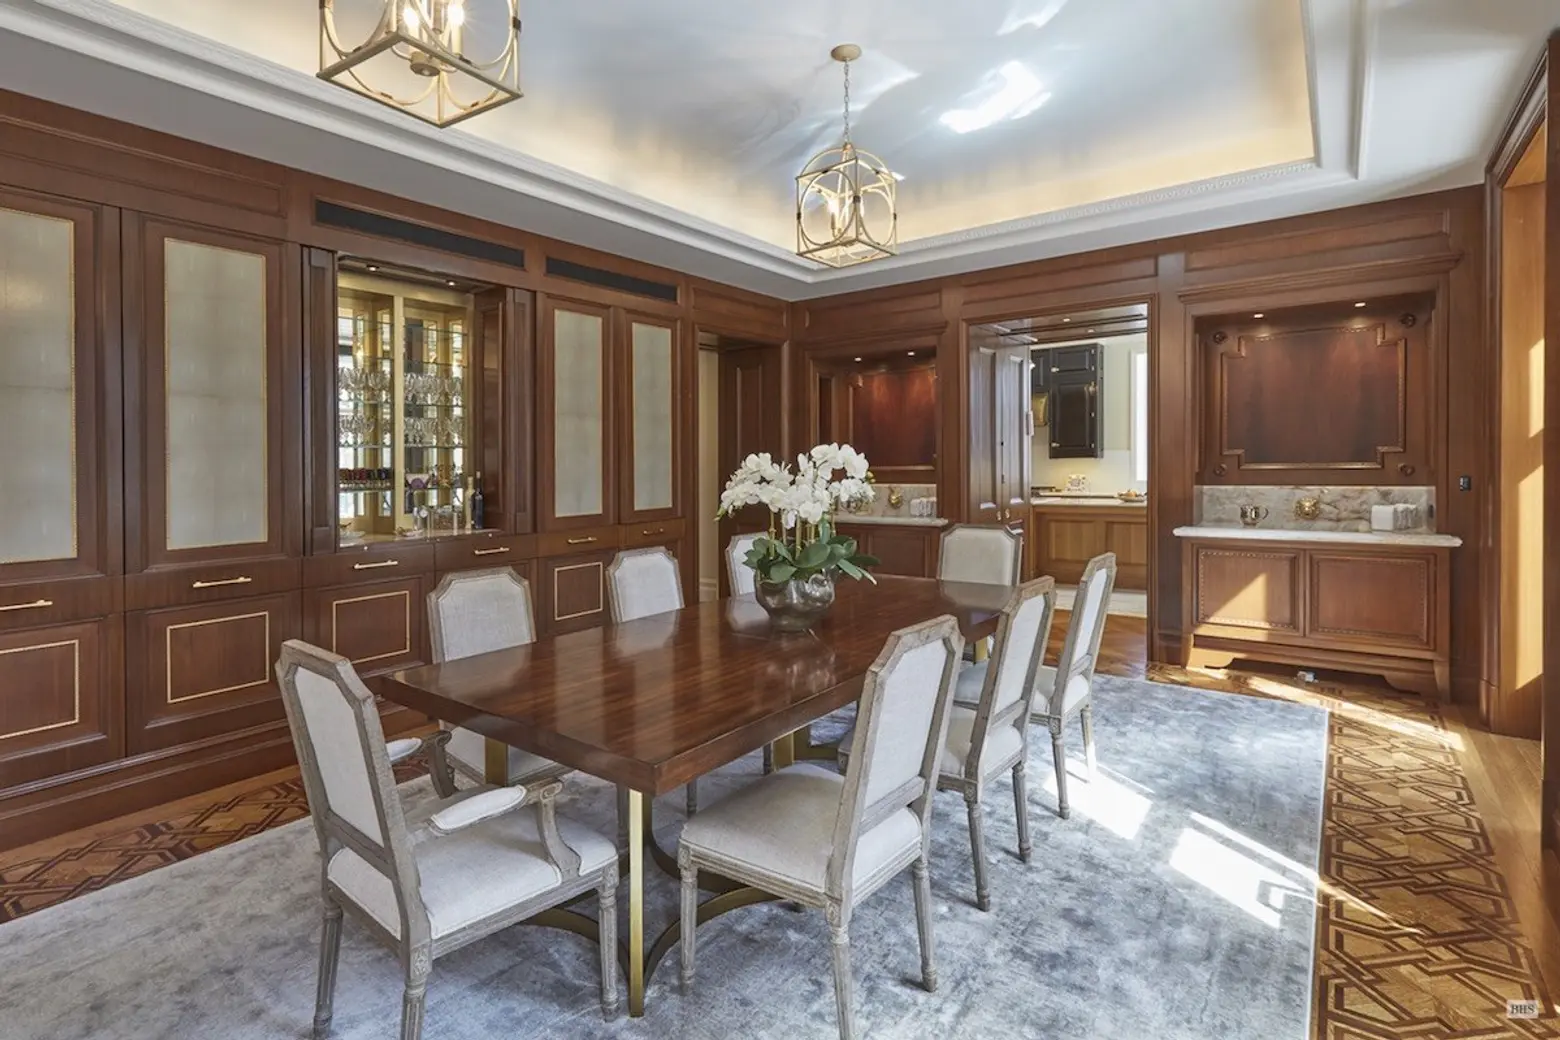 390 West End Avenue, Apthorp, Upper West Side, William Waldorf Astor, condo conversions, condominiums, most expensive, cool listings